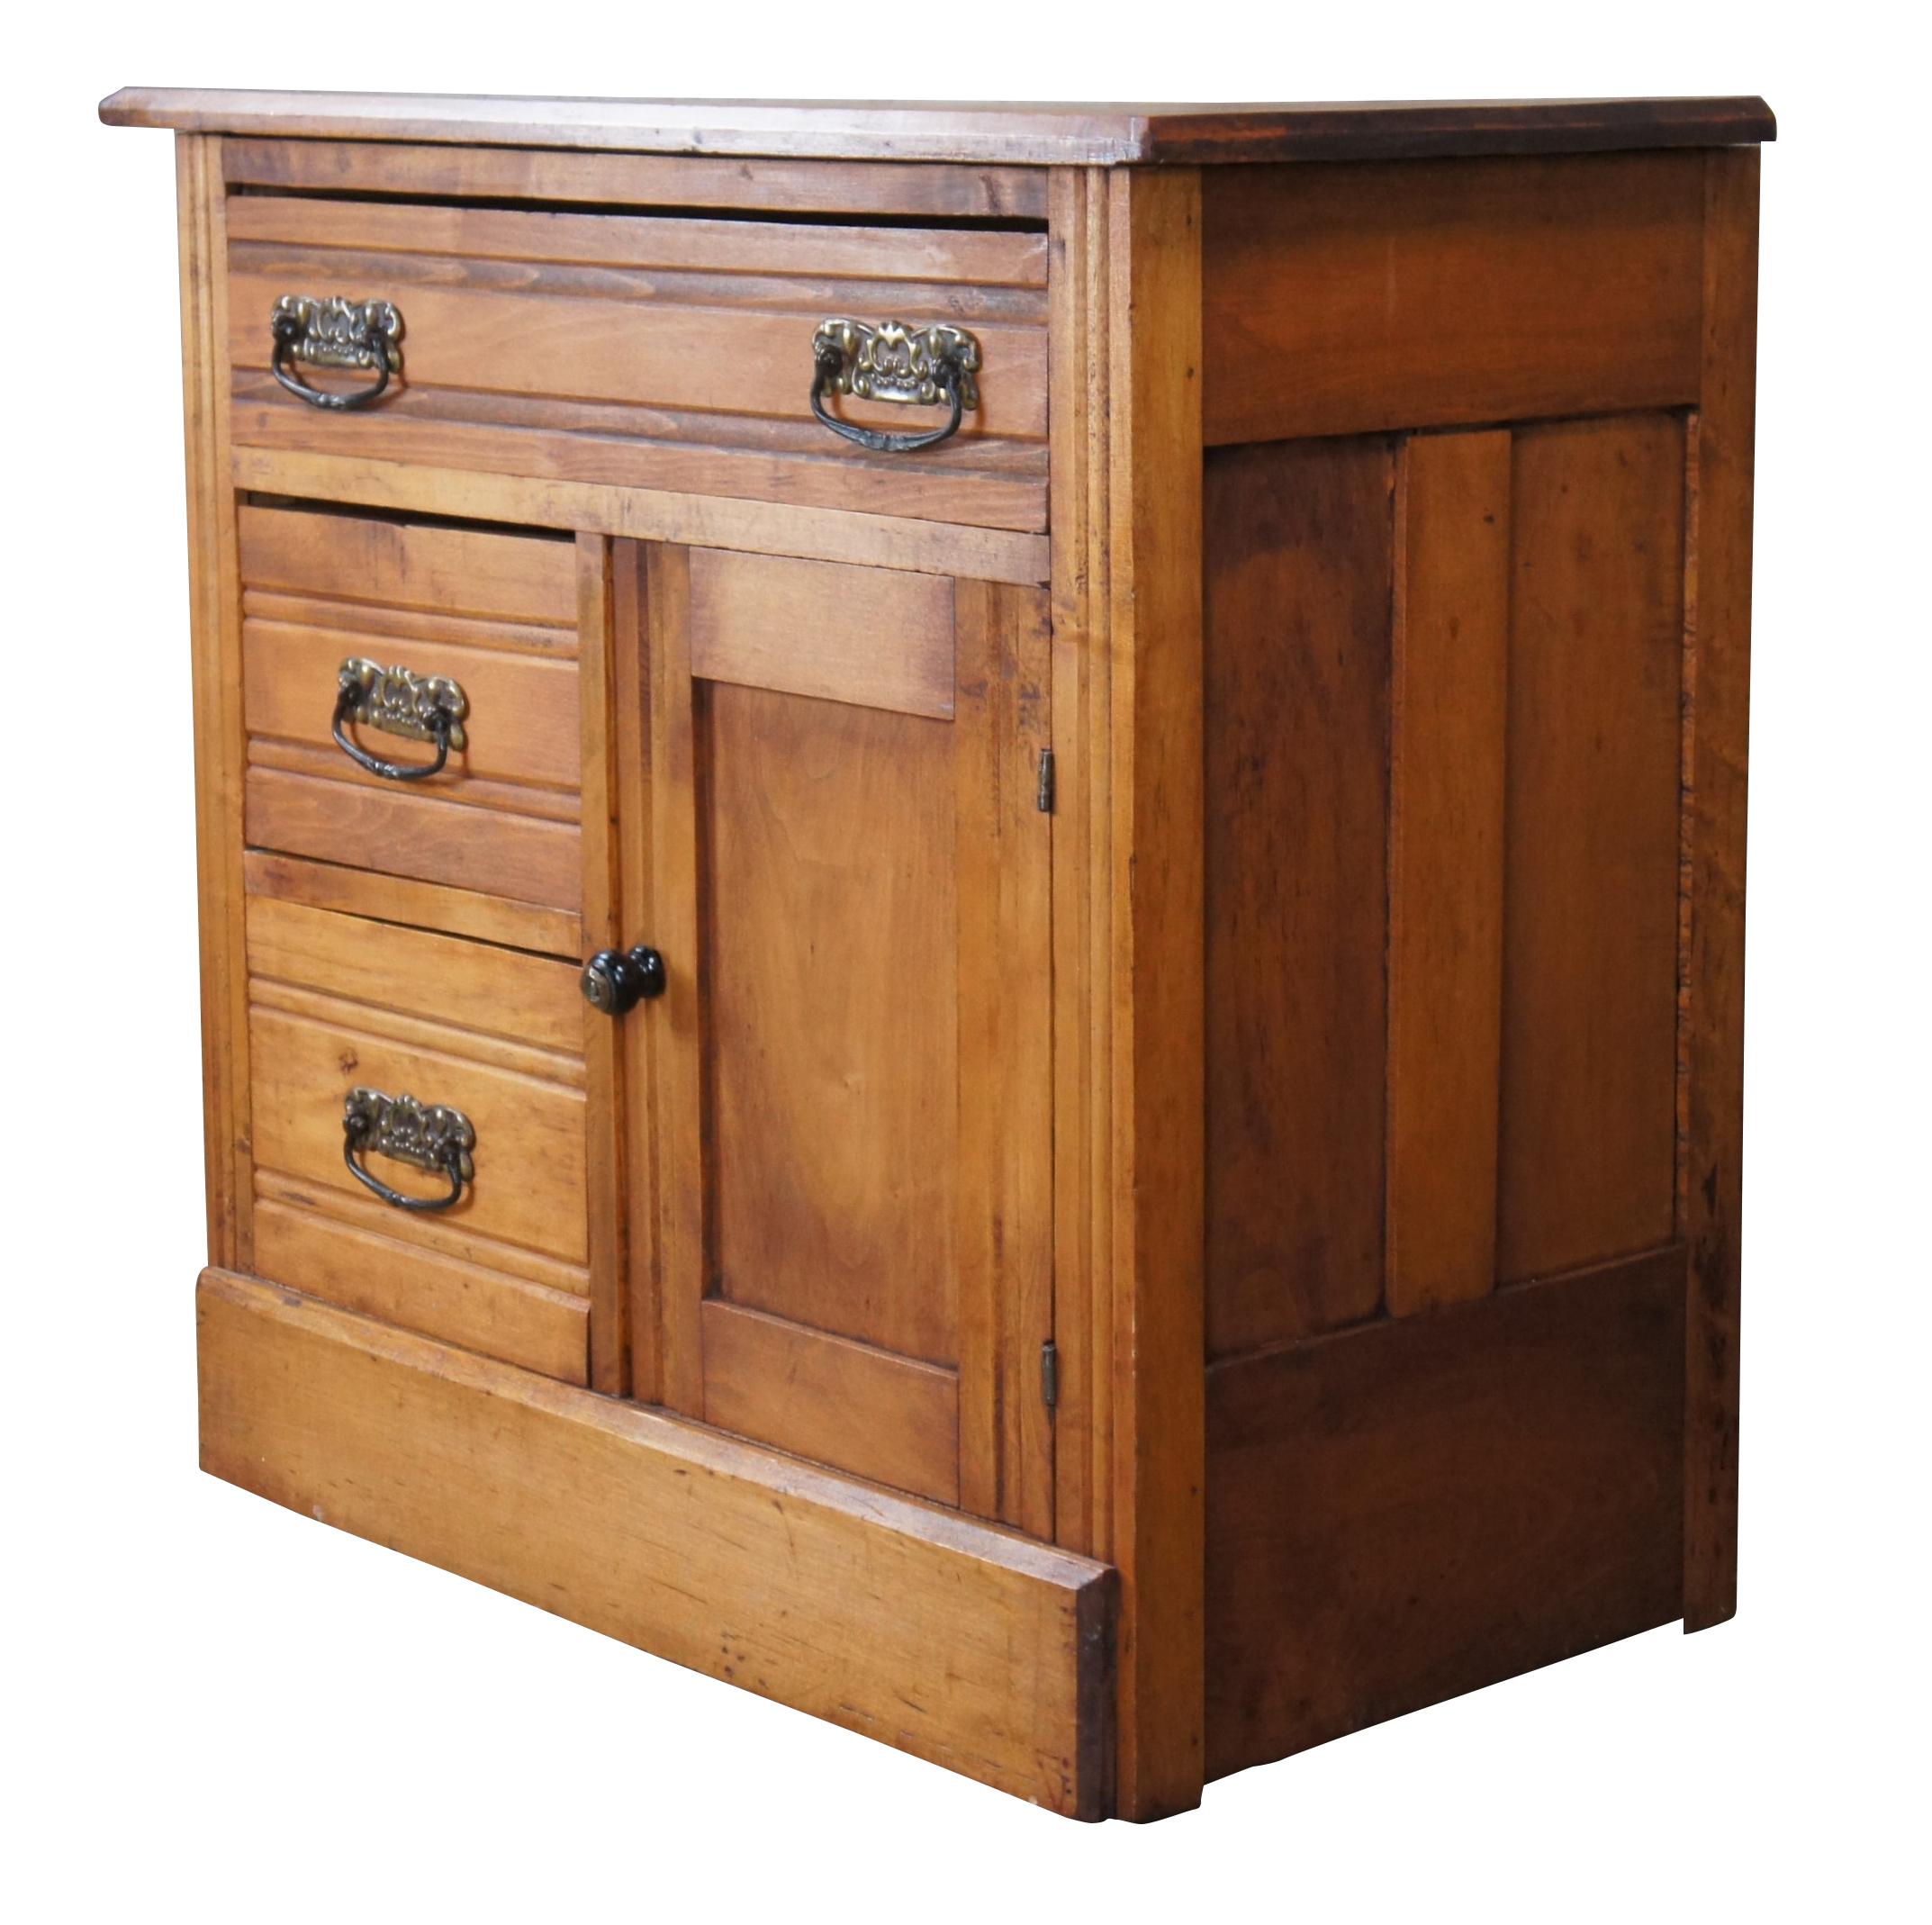 Turn of the century oak washstand featuring three drawers with side cabinet and brass hardware.